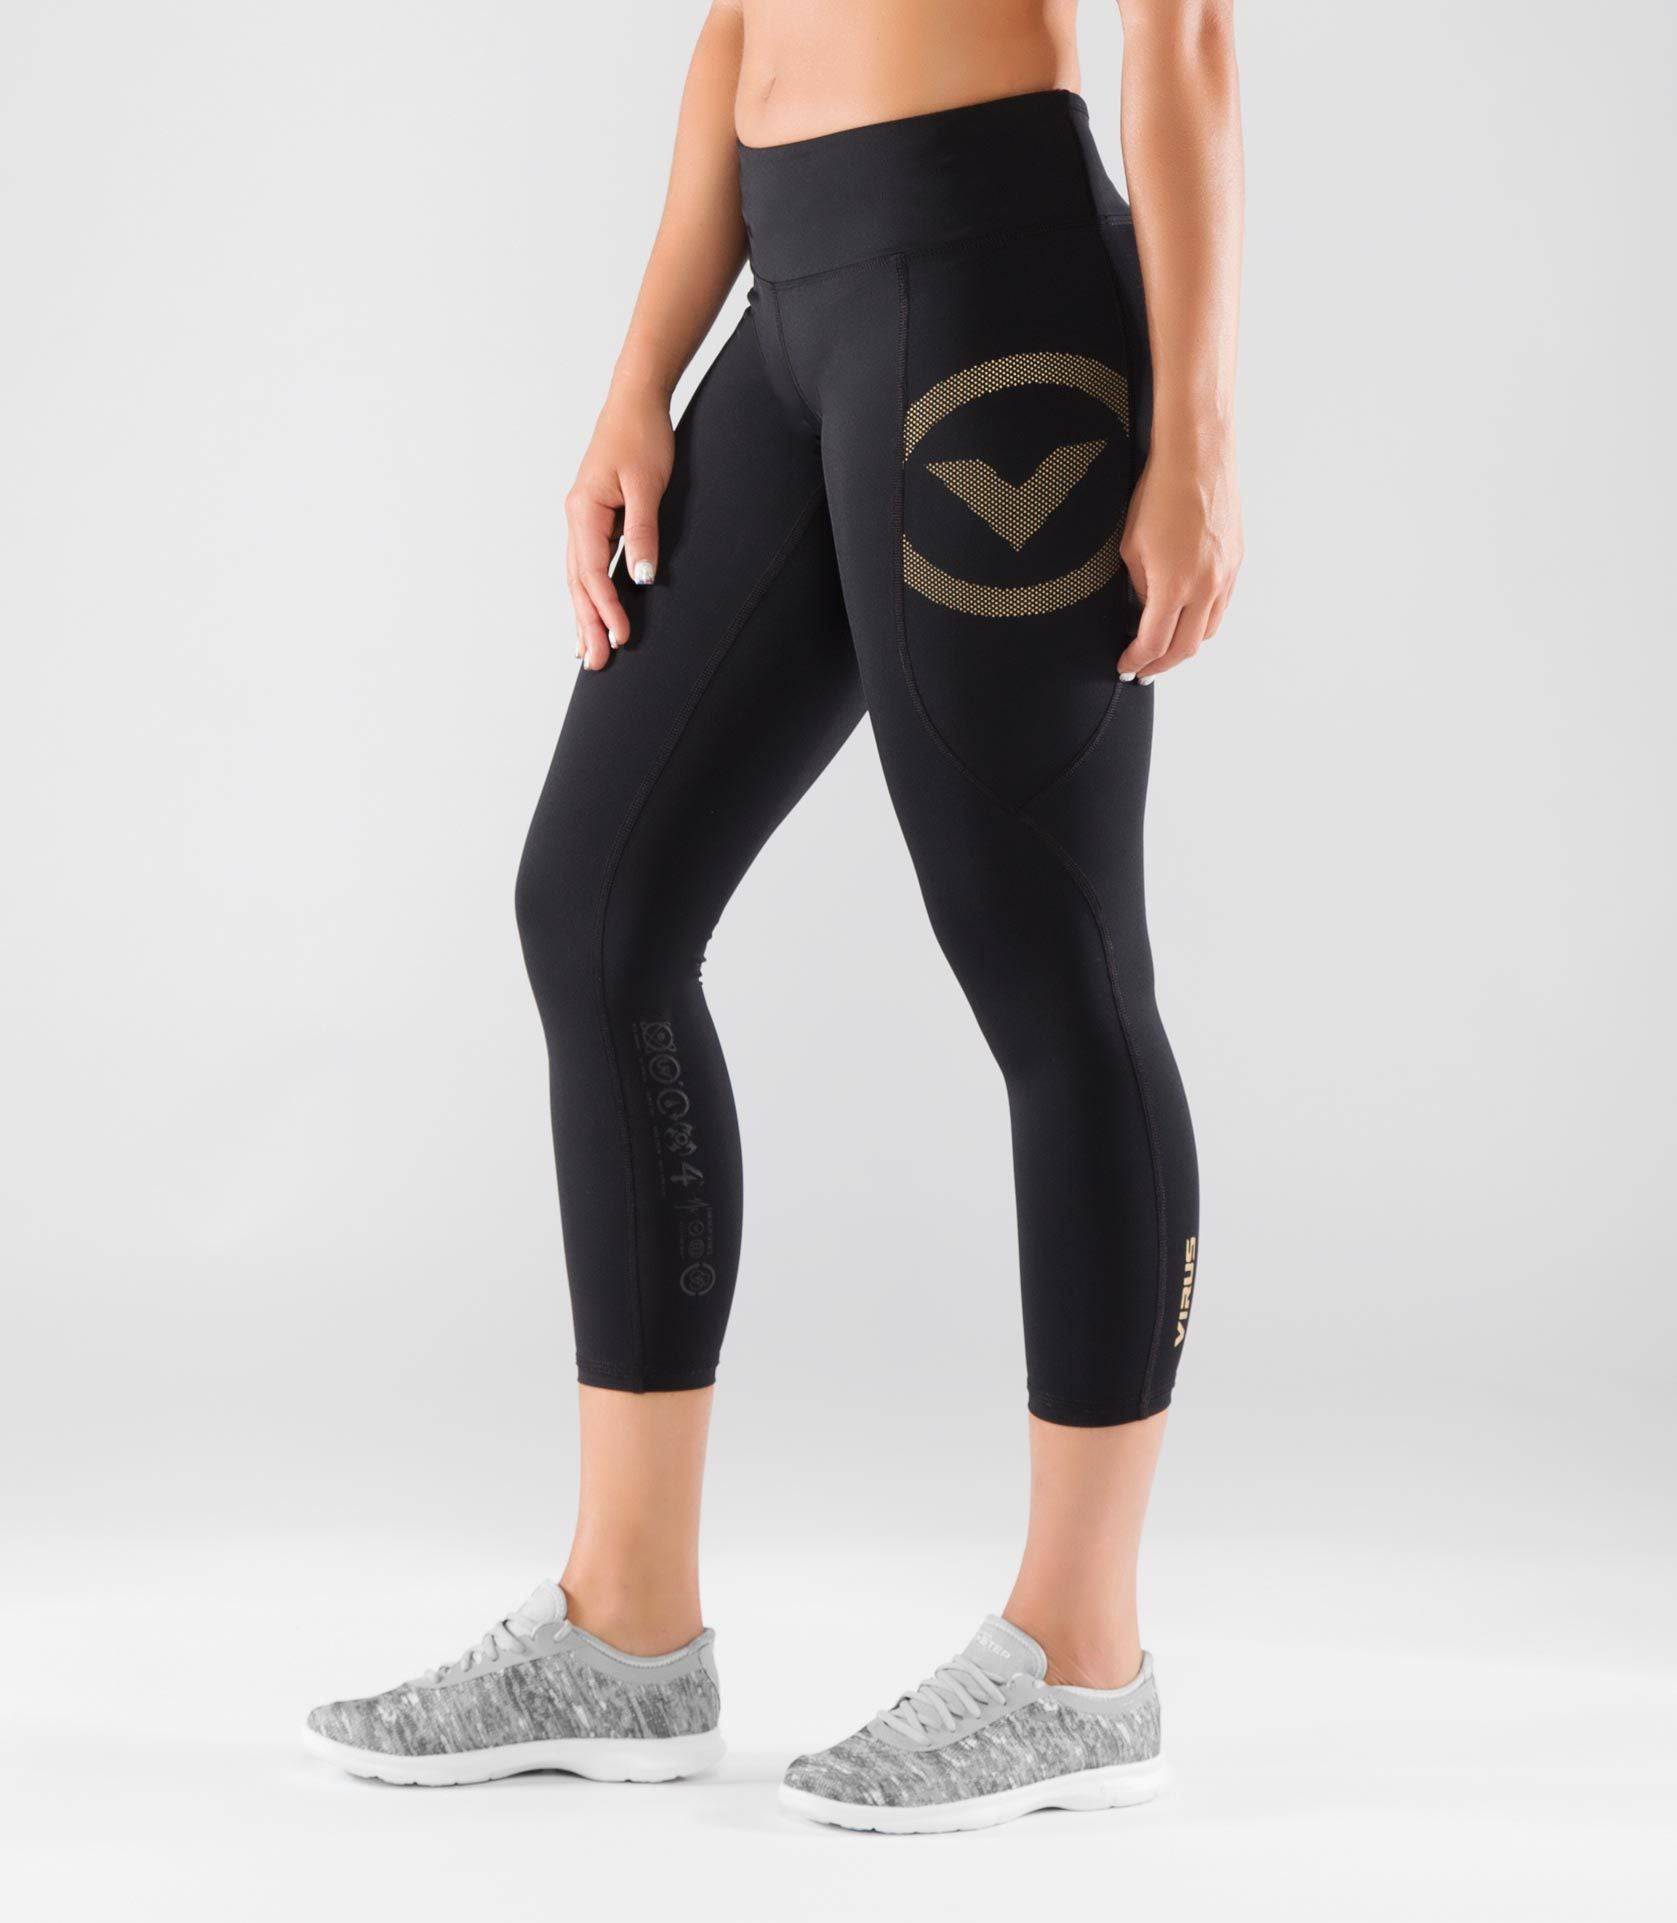 Best Compression Pants For Lifting  Virus Intl Compression Pants & Shorts  